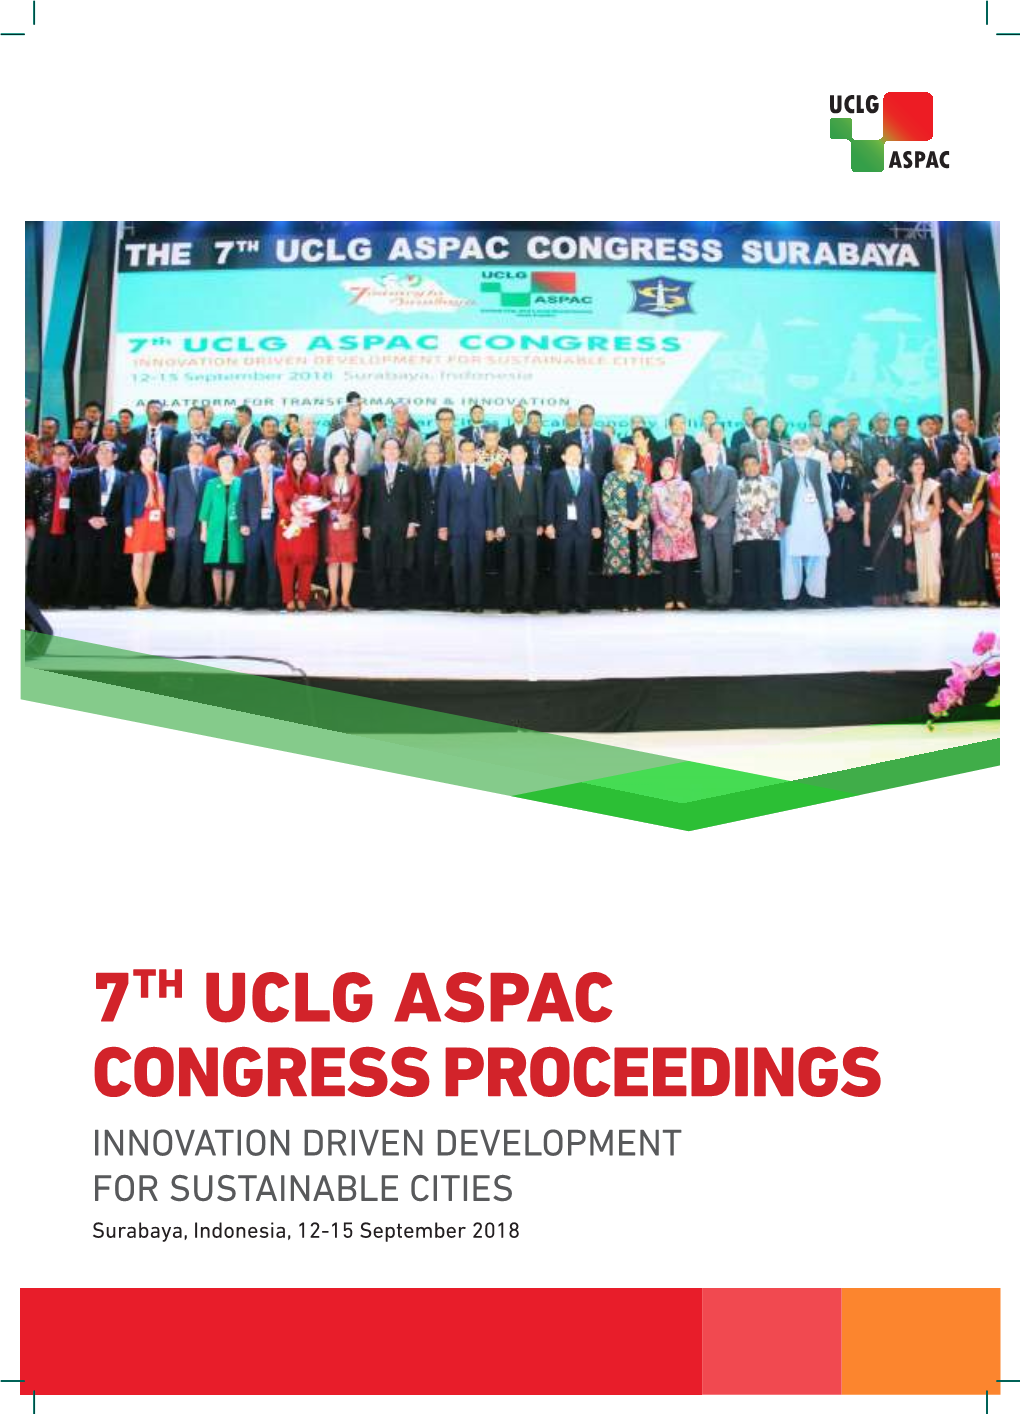 7TH UCLG ASPAC CONGRESS PROCEEDINGS INNOVATION DRIVEN DEVELOPMENT for SUSTAINABLE CITIES Surabaya, Indonesia, 12-15 September 2018 Table of Contents Foreword